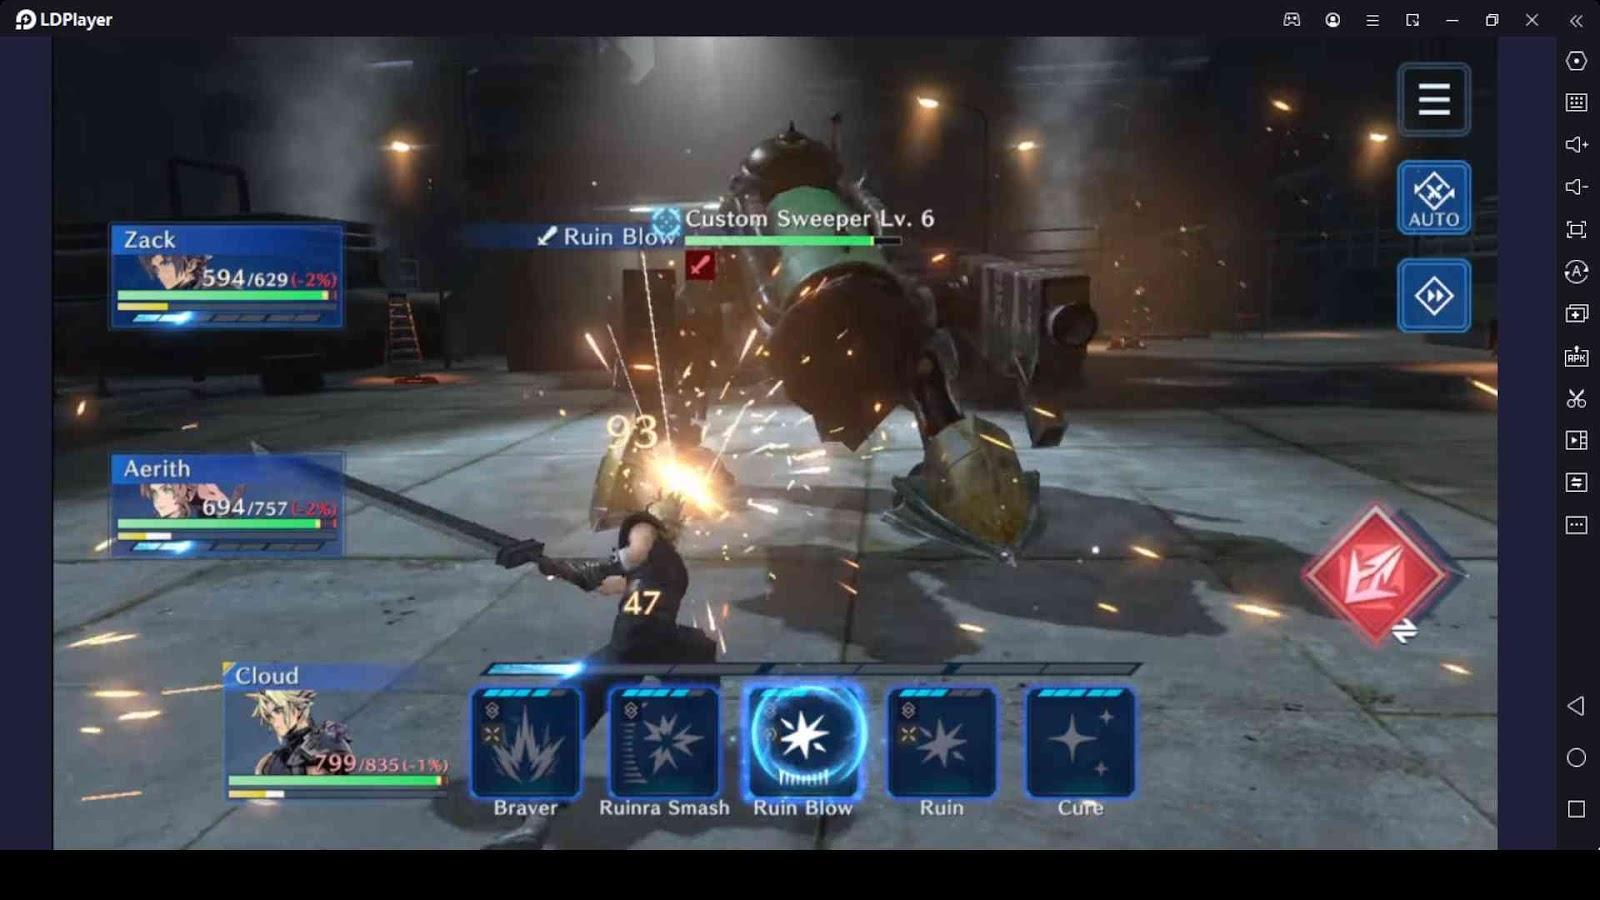 FINAL FANTASY VII EVER CRISIS Gameplay Walkthrough – A Beginner's Guide and  Tips-Game Guides-LDPlayer